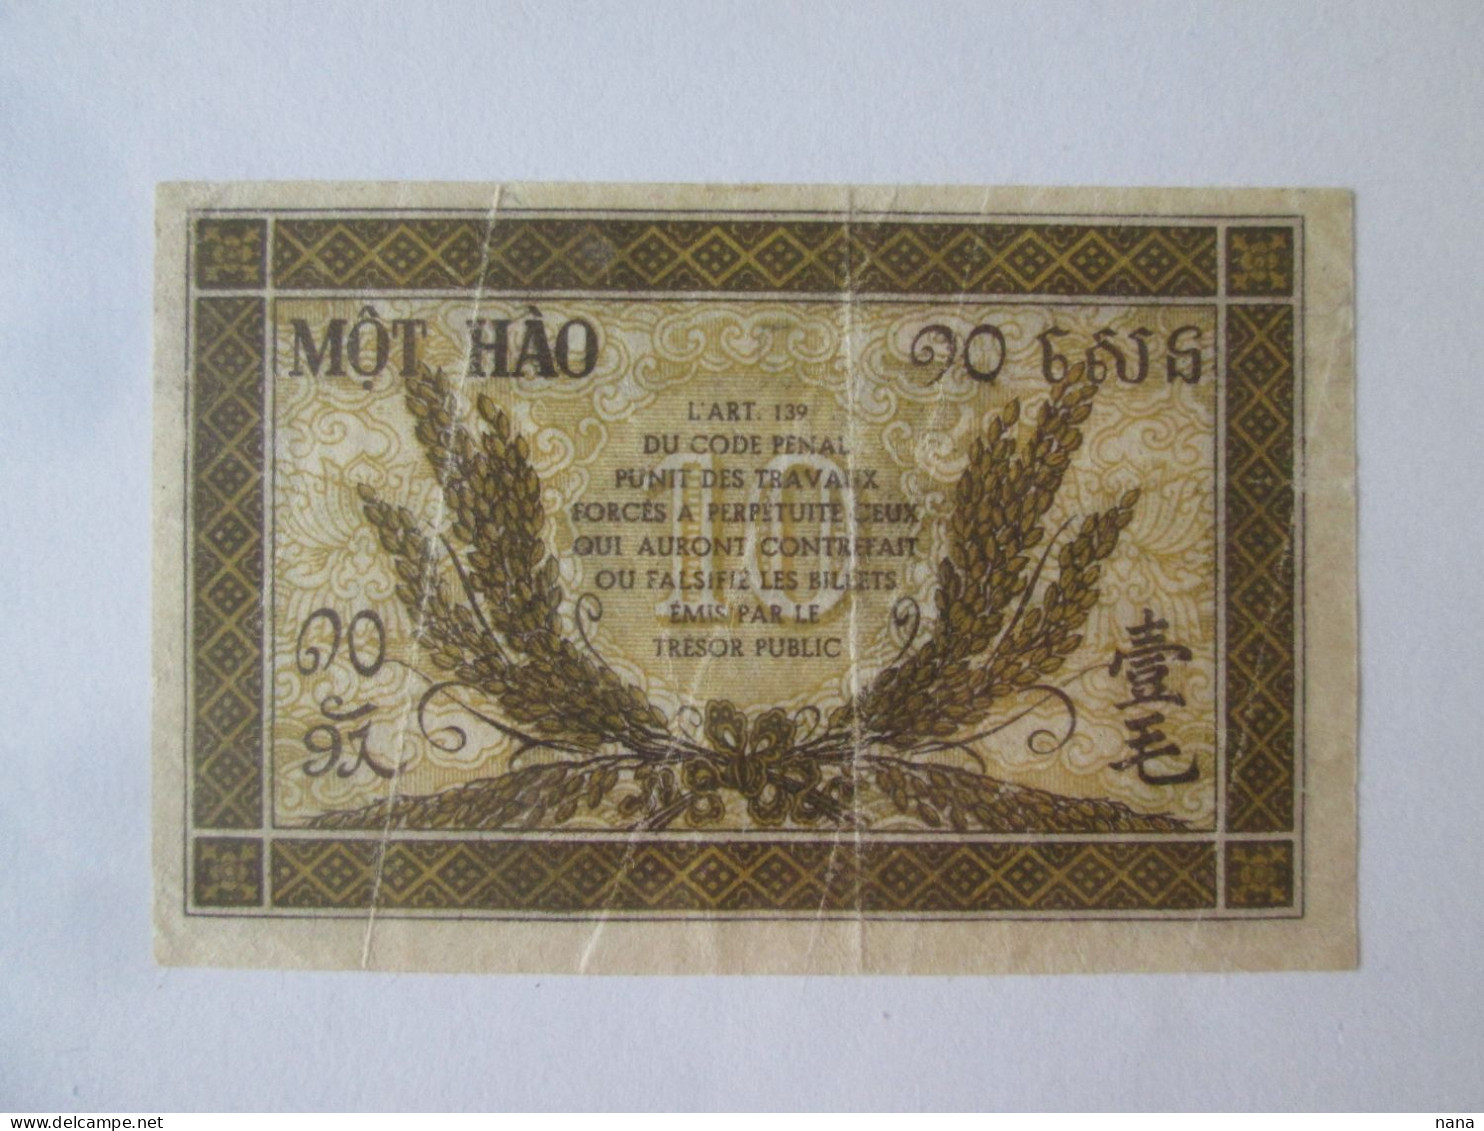 French Indochina:Cambodia,Laos,Vietnam 10 Cents 1942 Banknote See Pictures - Indochina